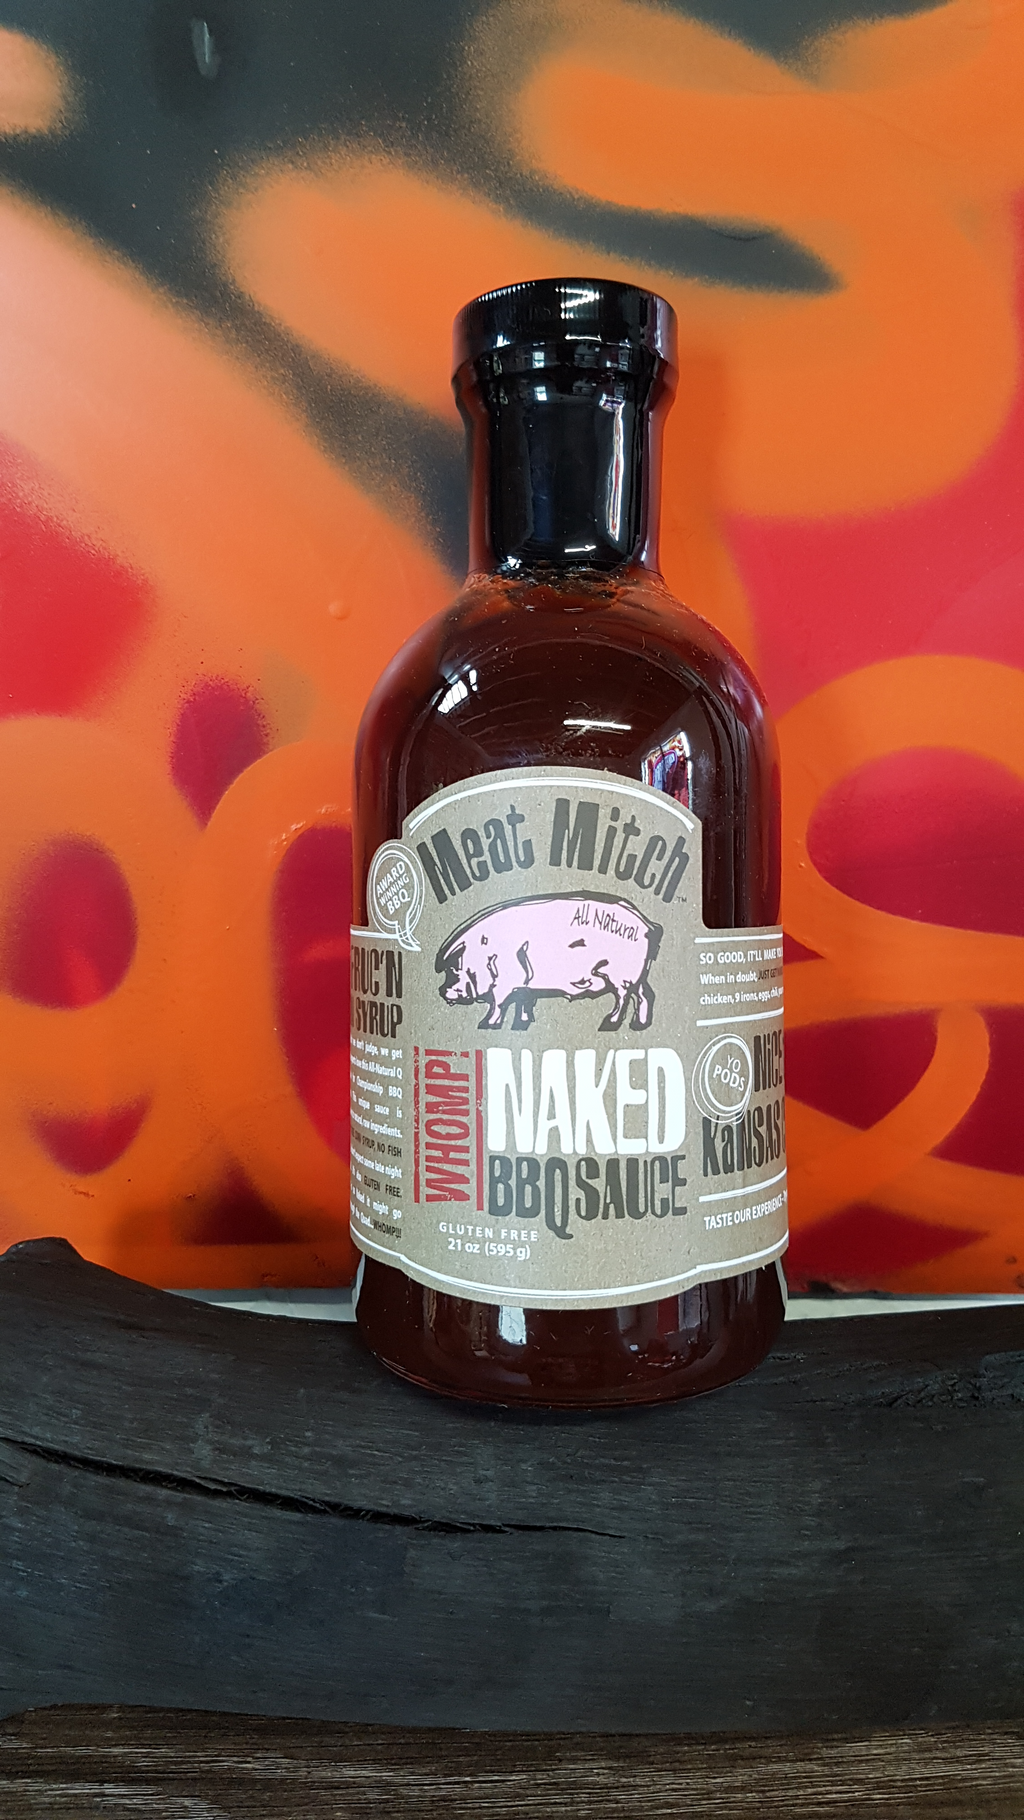 Whomp! Naked BBQ Sauce 595g by Meat Mitch